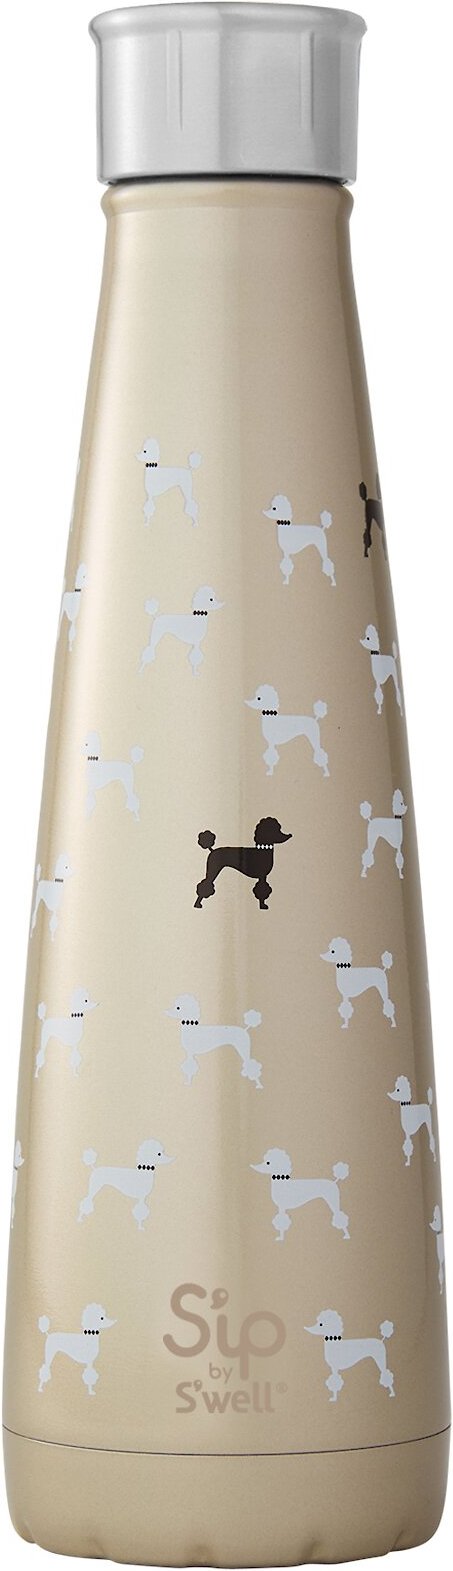 Sip By S'well Poodle Print Insulated Water Bottle Stainless Steel New 15 Oz. 